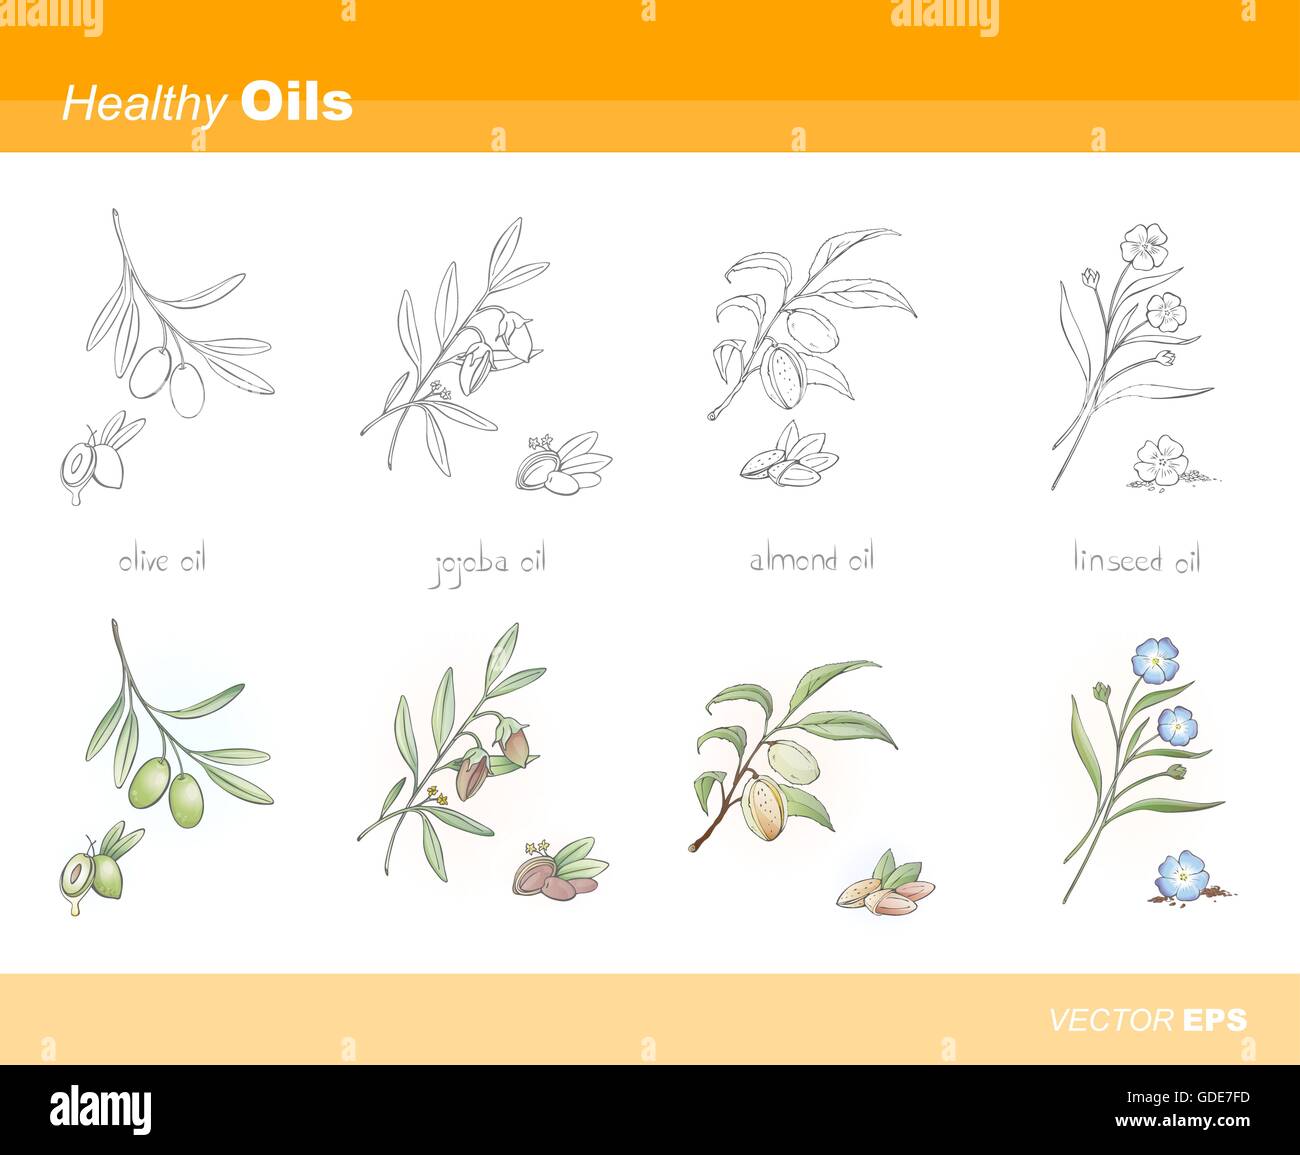 Healthy oils set: olive, jojoba, almond and linseed Stock Vector